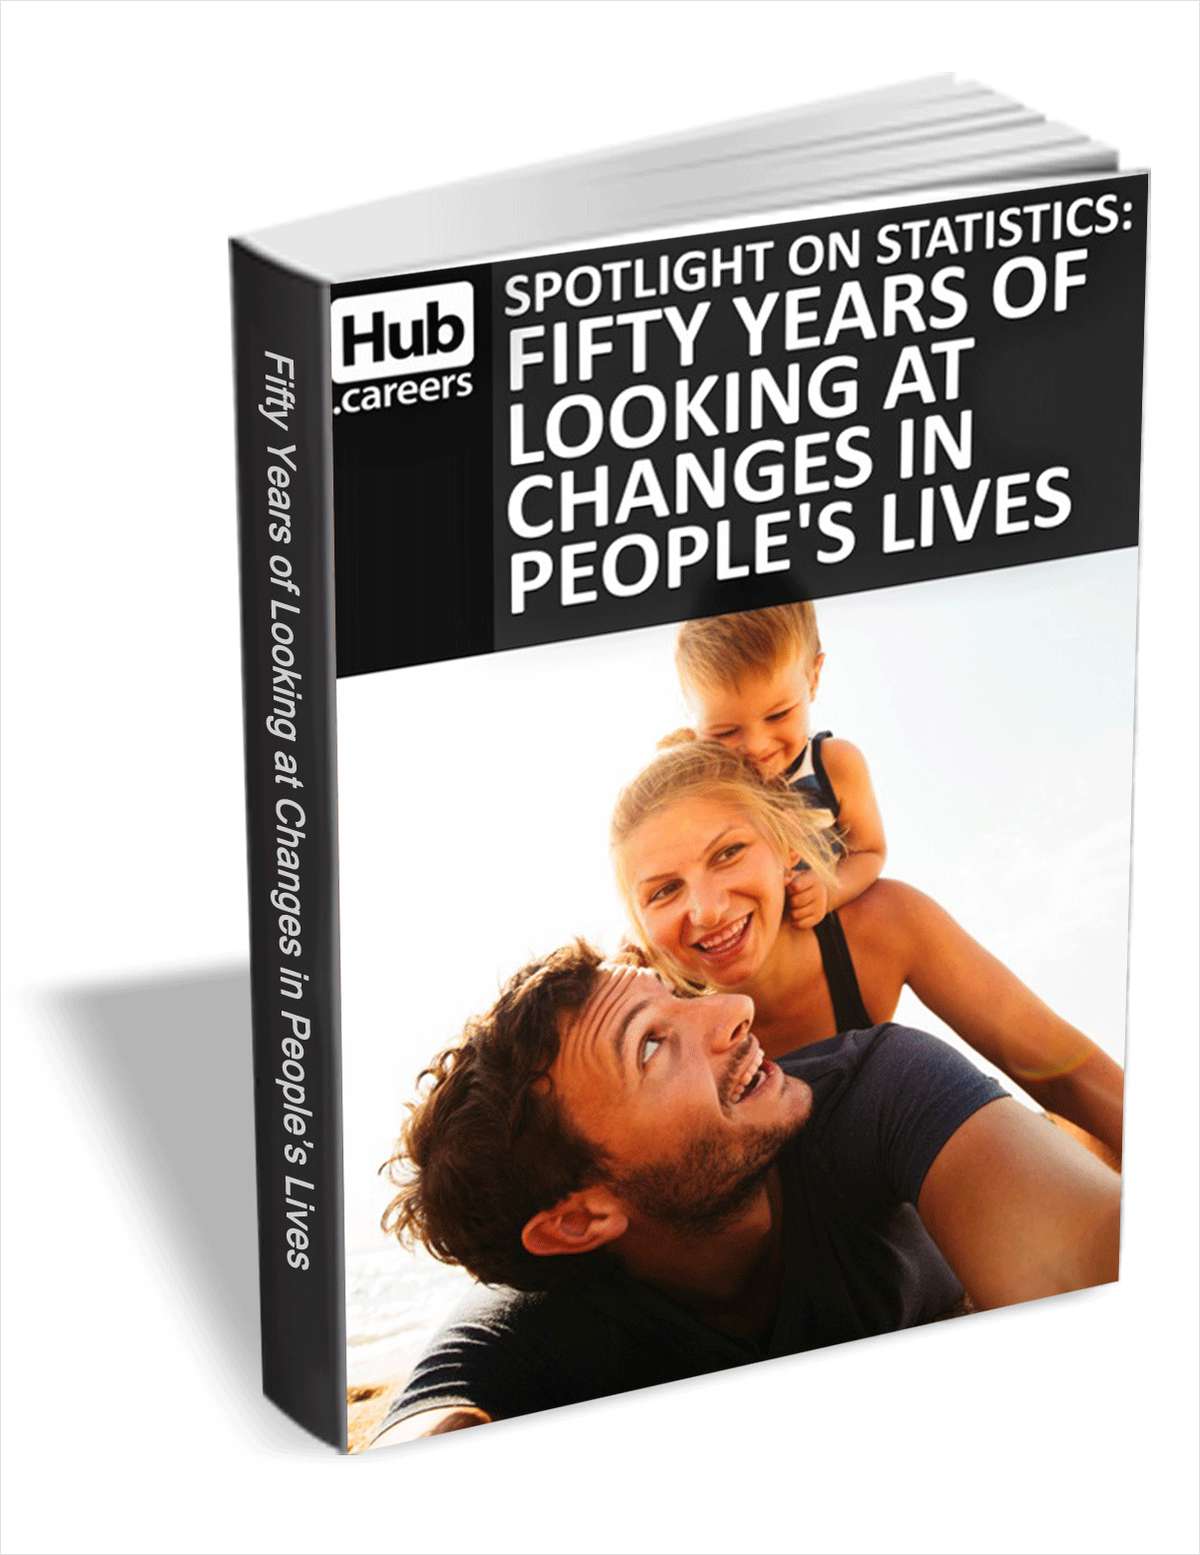 Fifty Years Of Looking At Changes In People's Lives - Spotlight on Statistics